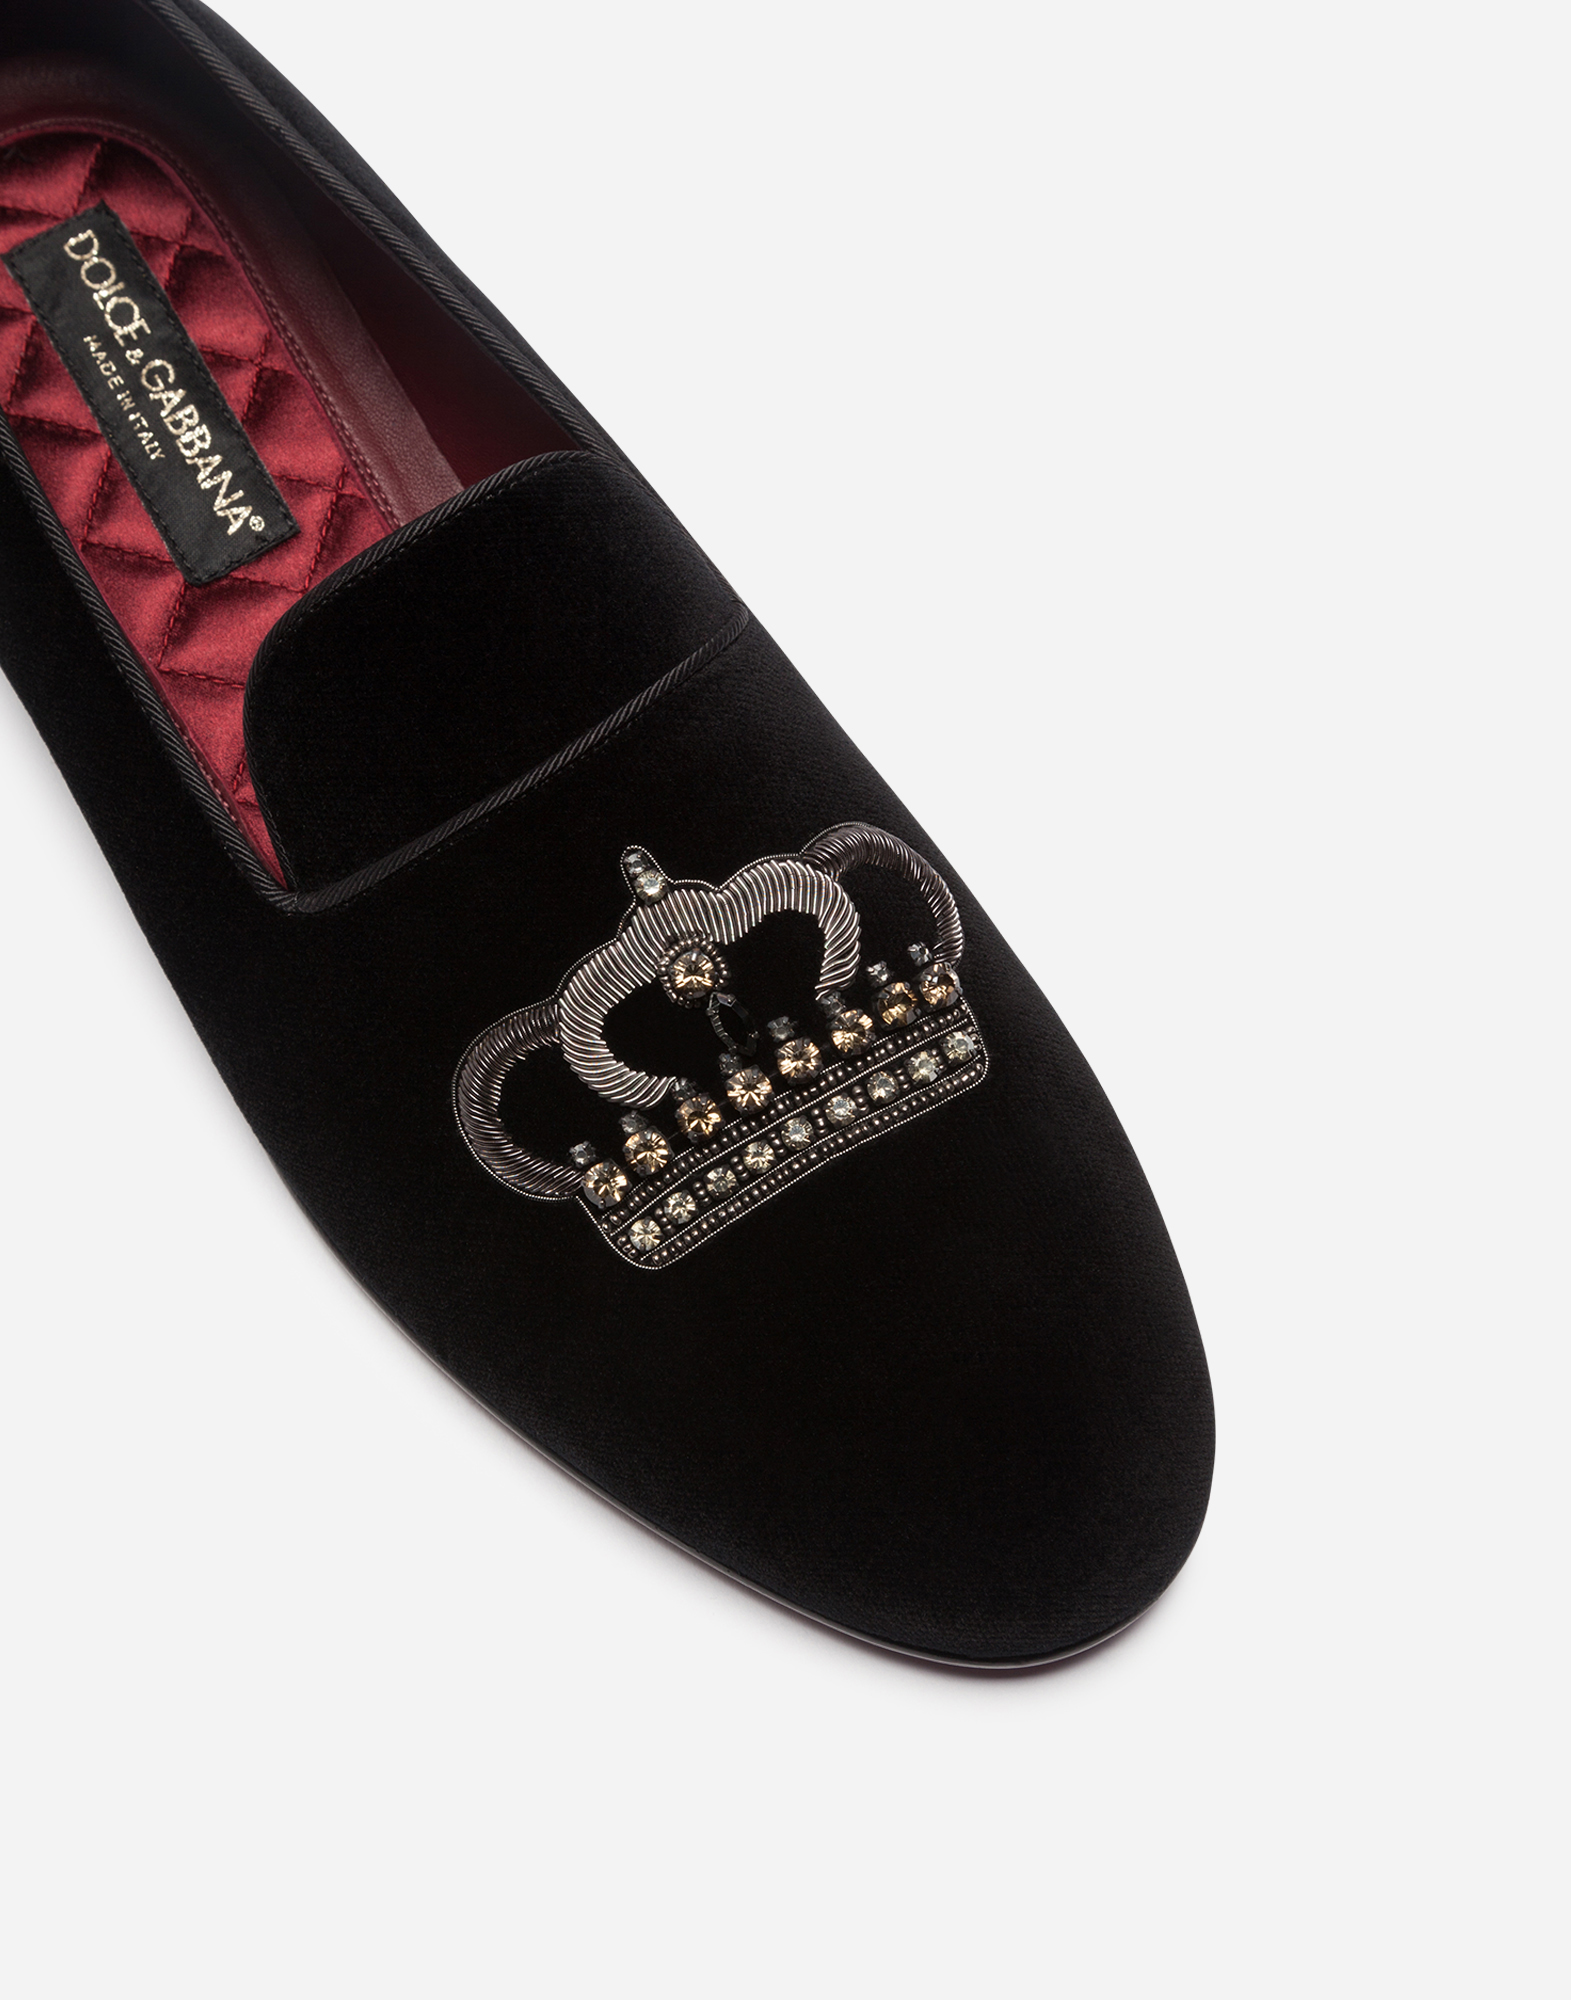 dolce gabbana mens loafers